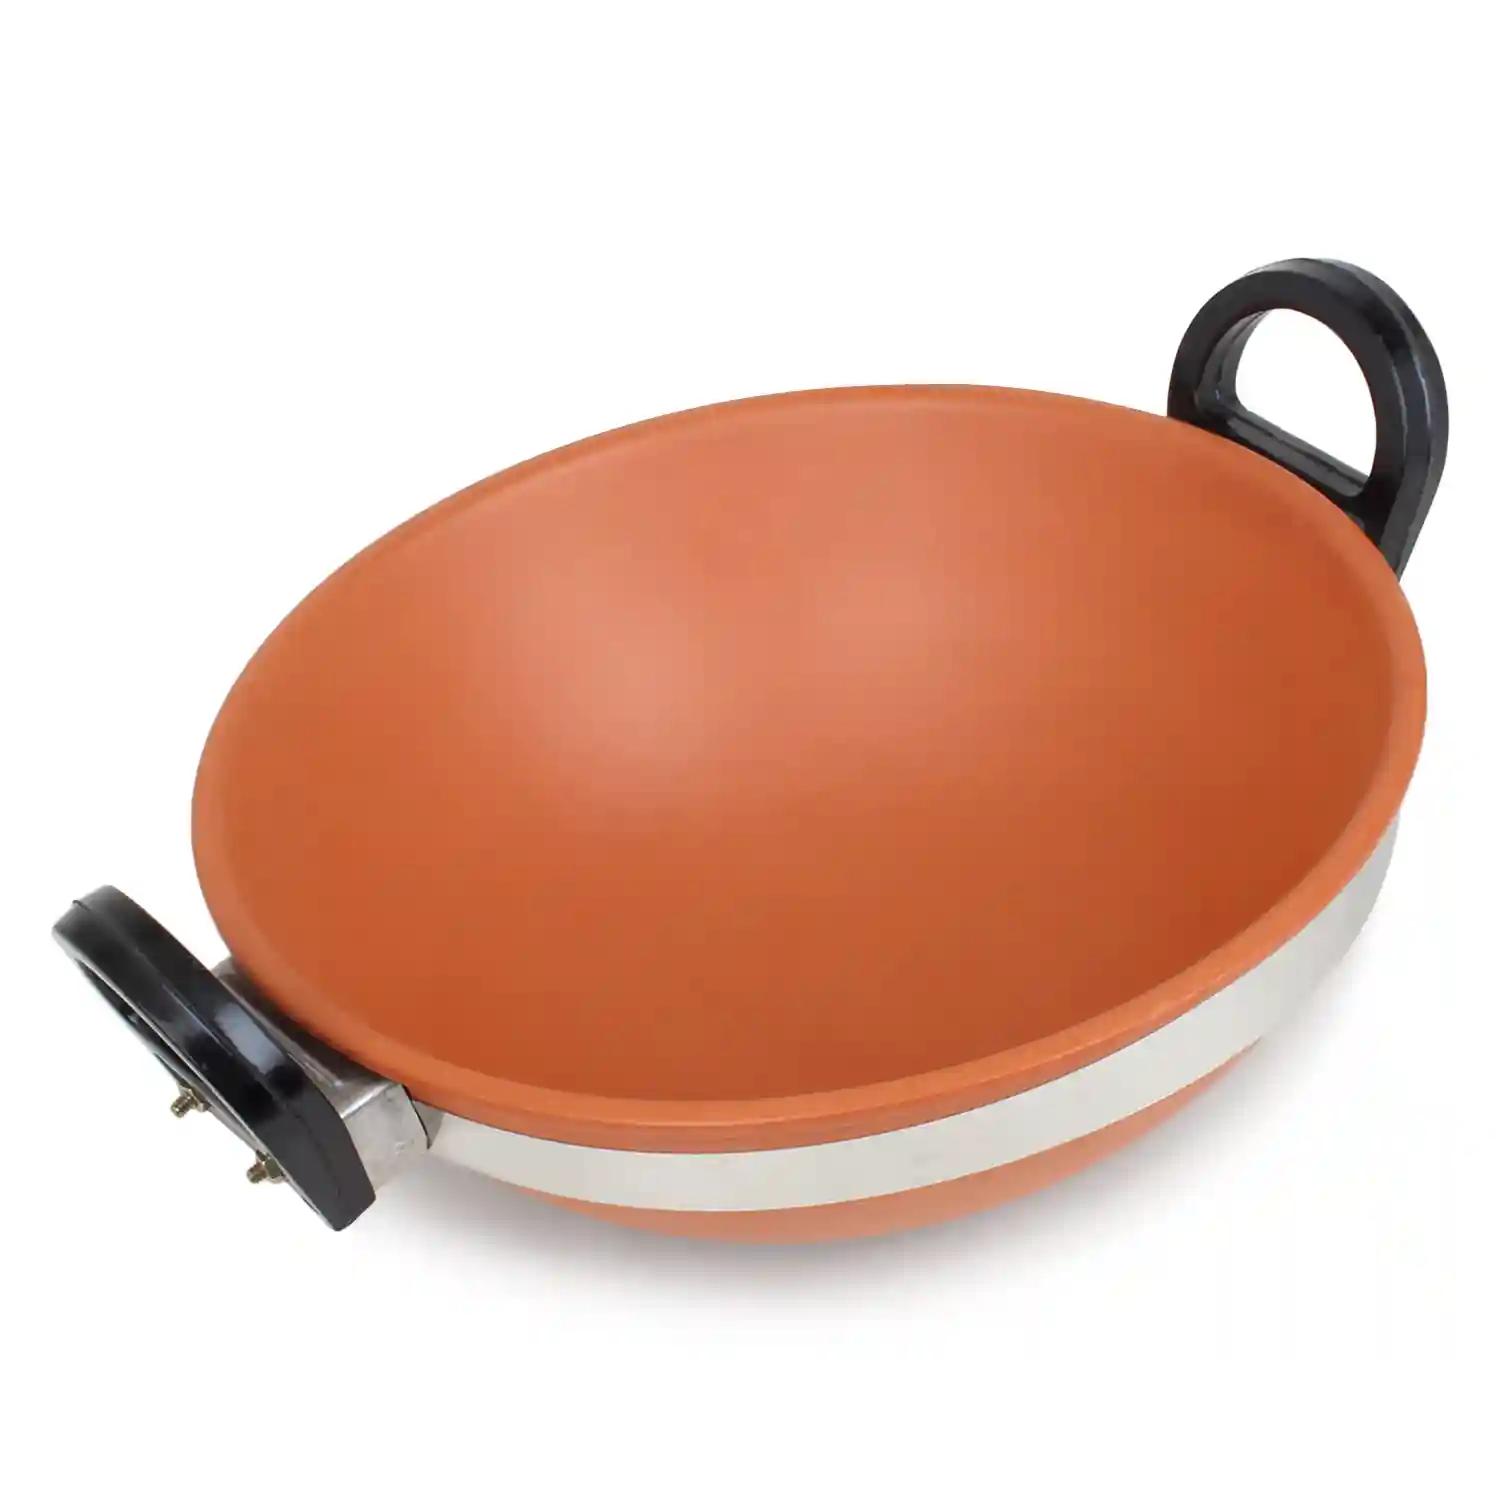 KSI Handmade Terracotta Indian Kadhai with Lid Pottery Earthen Clay Kadhai for Cooking and Wooden Spatula Combo 2.5 litres